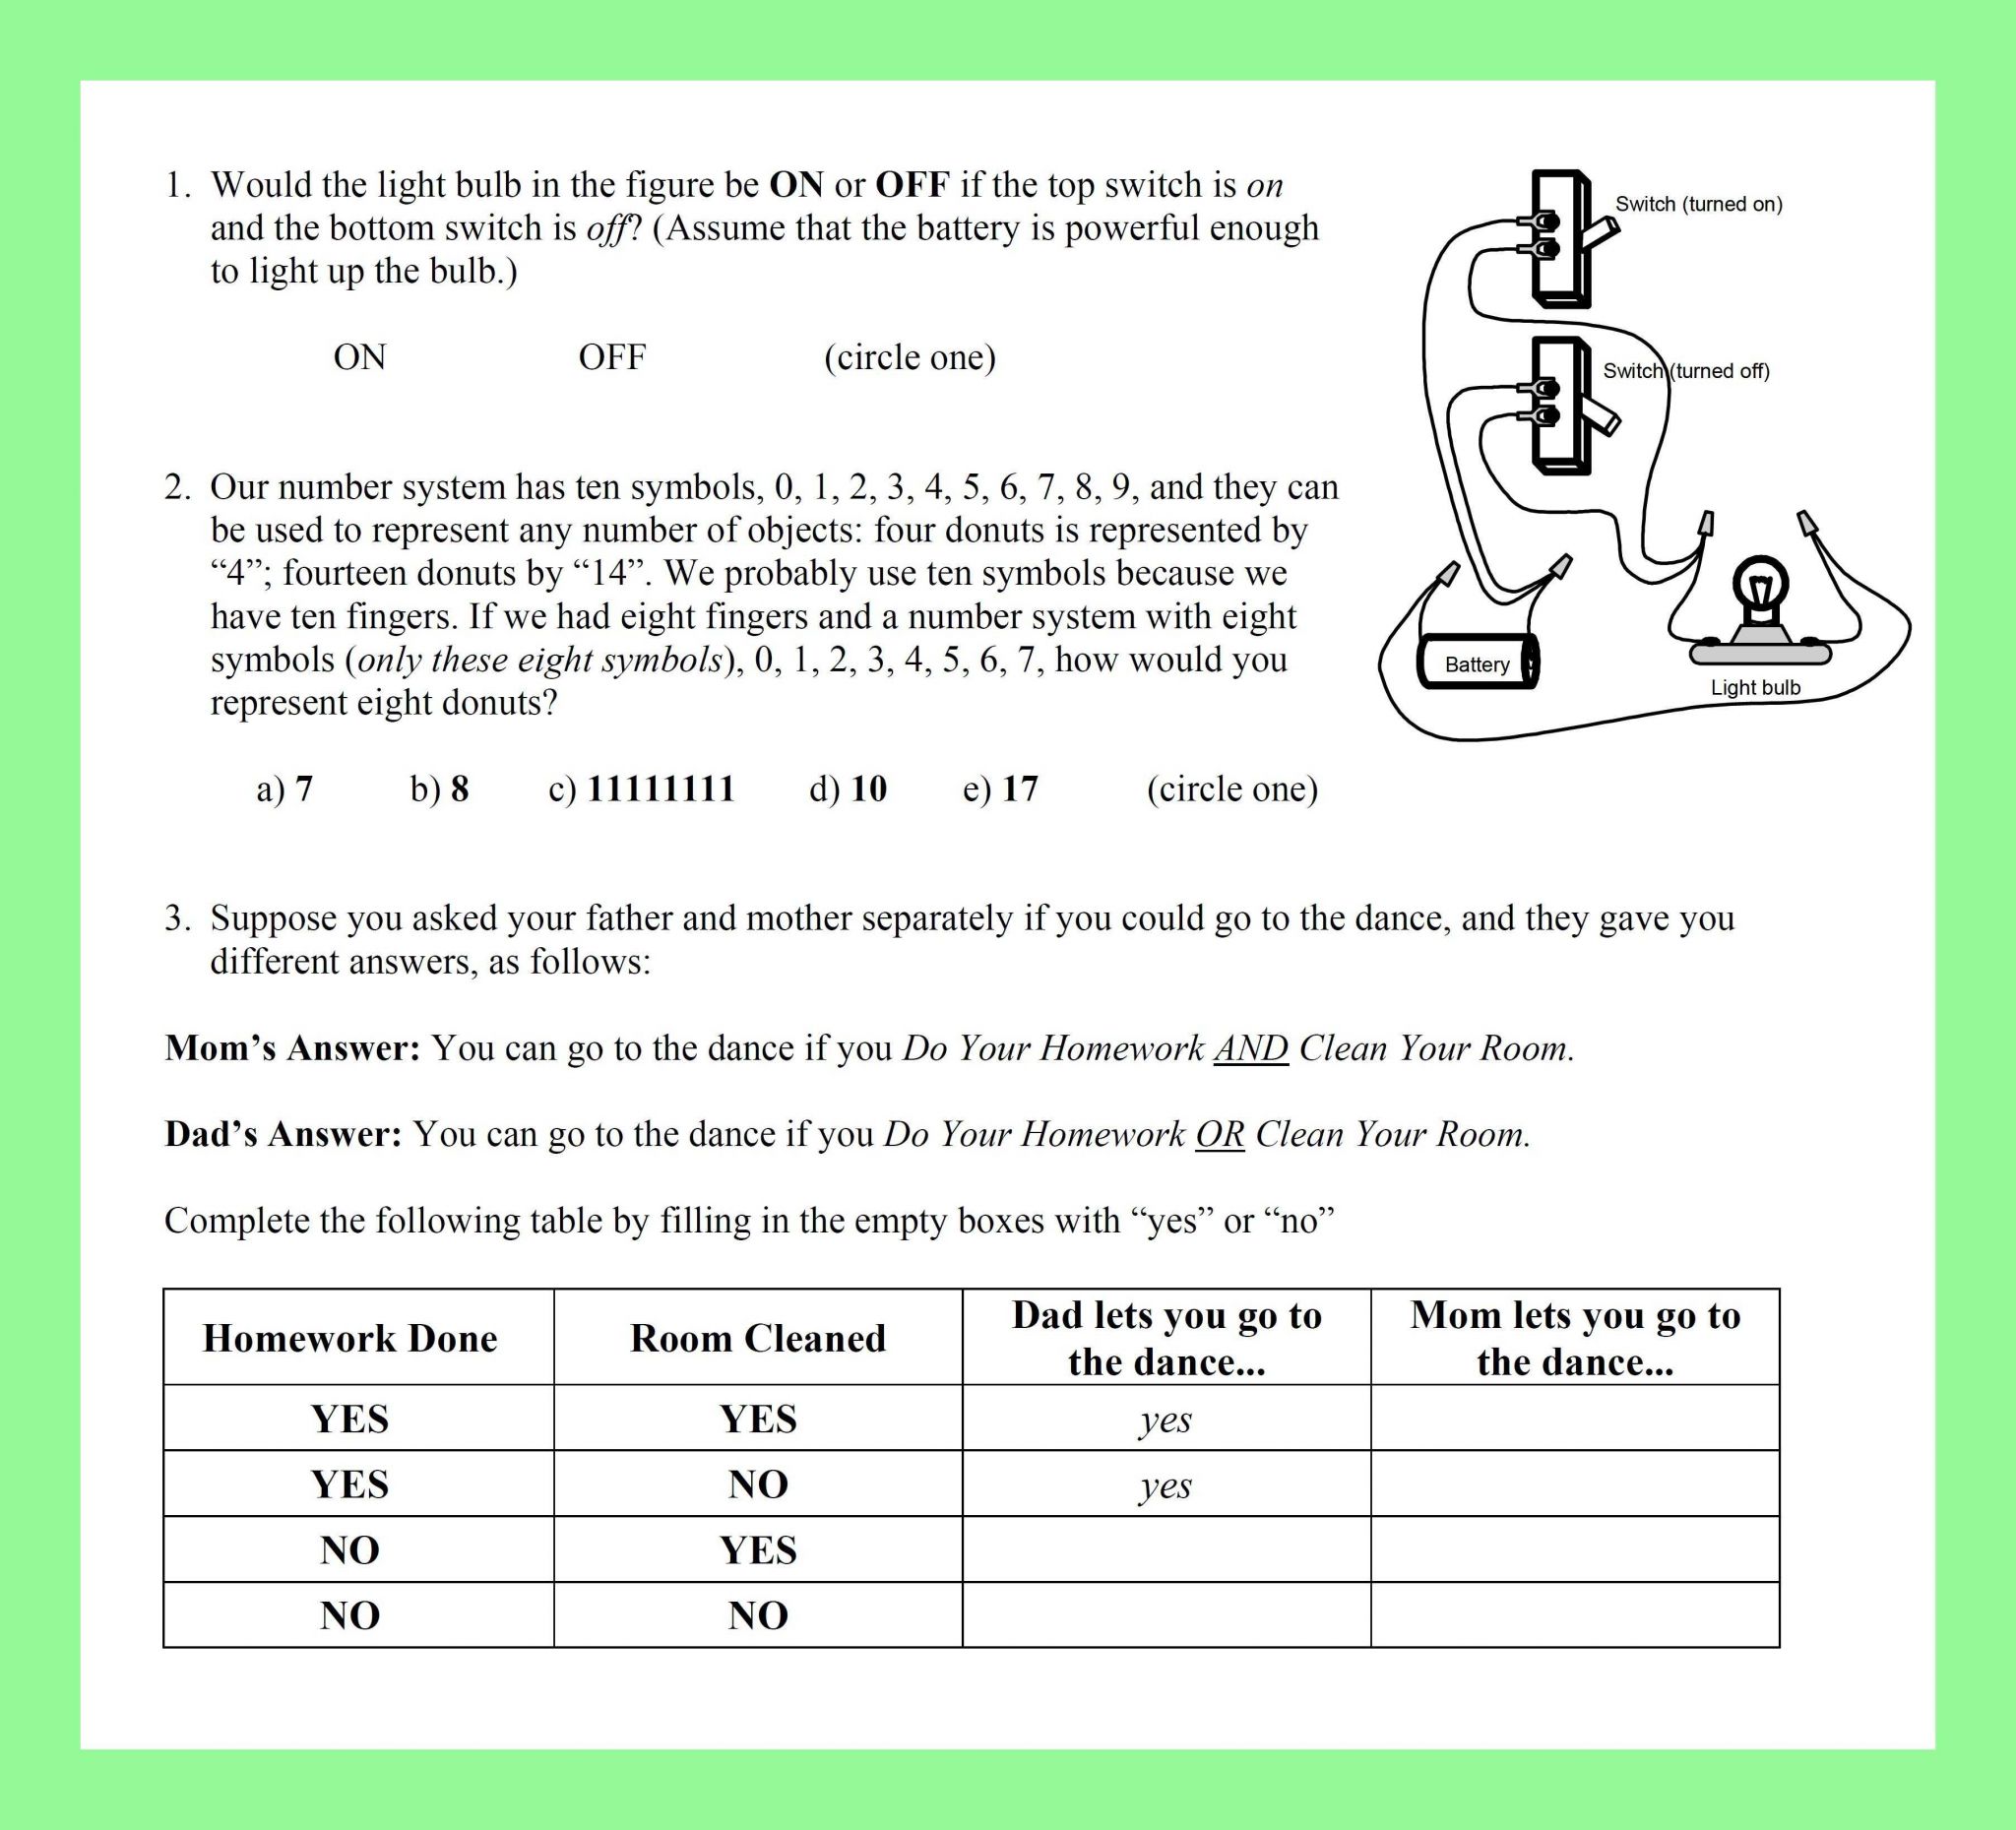 Phet isotopes and atomic Mass Worksheet Answer Key as Well as Periodic Table Trends Worksheet Best Periodic Table Activity Lab